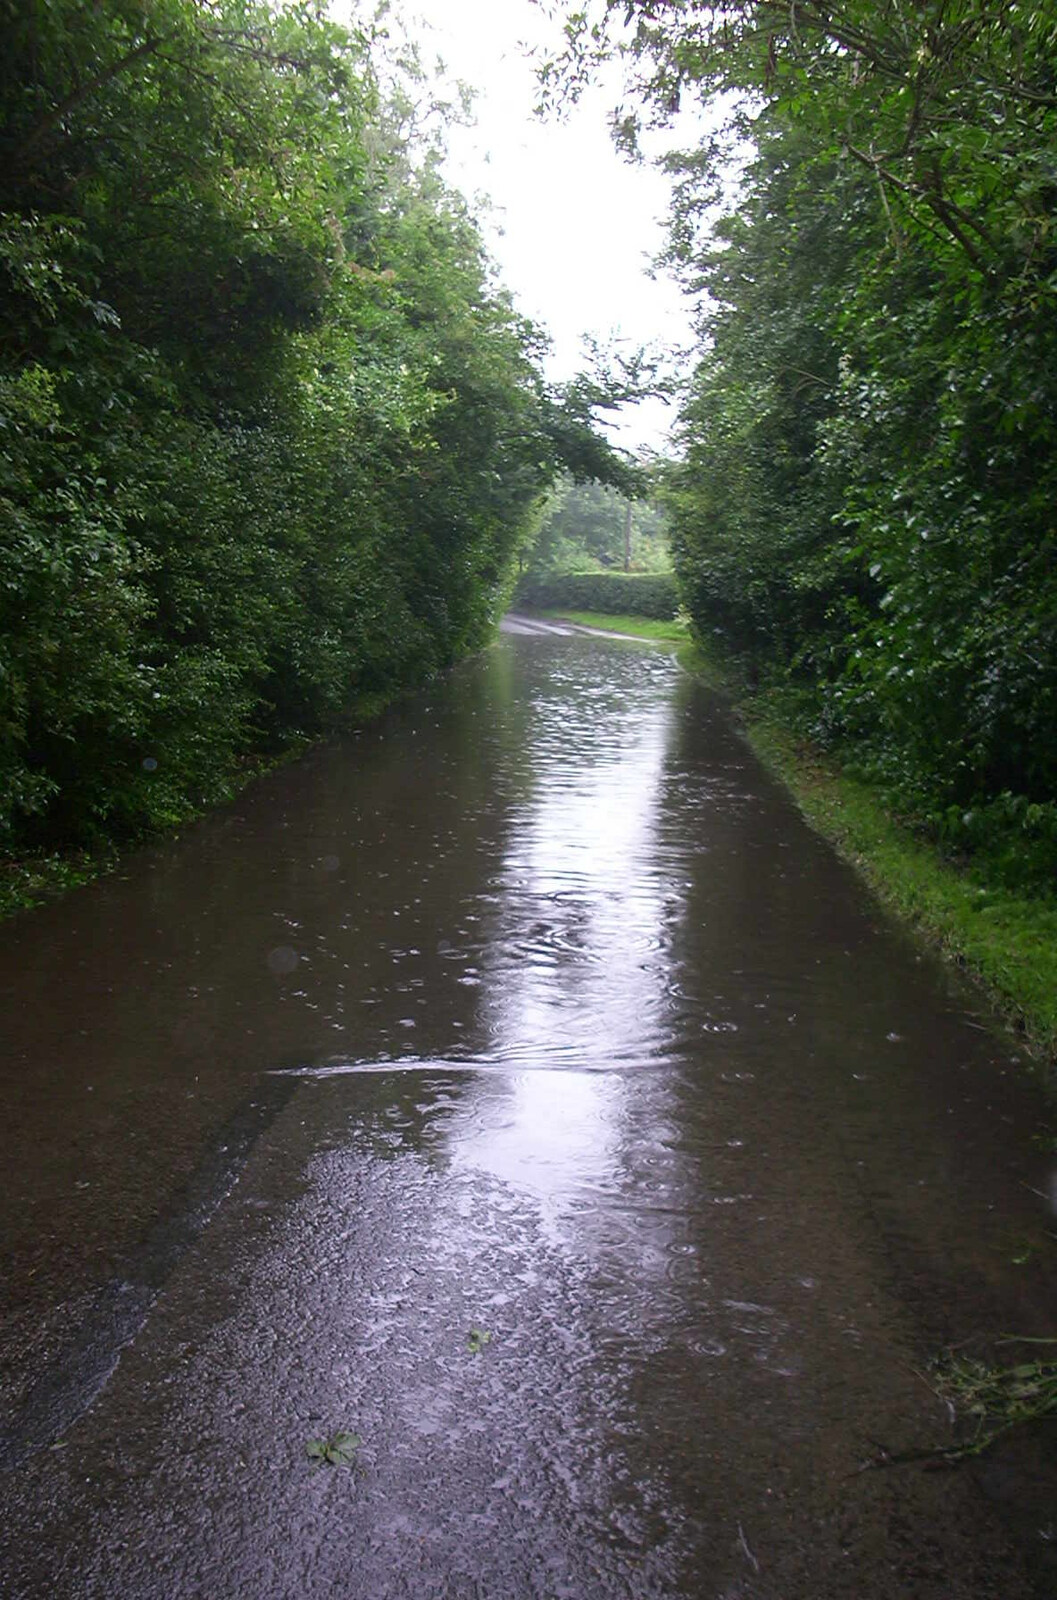 Spammy's Barbeque and A Summer Miscellany - 1st June 2002: The road in Brome is a bit flooded